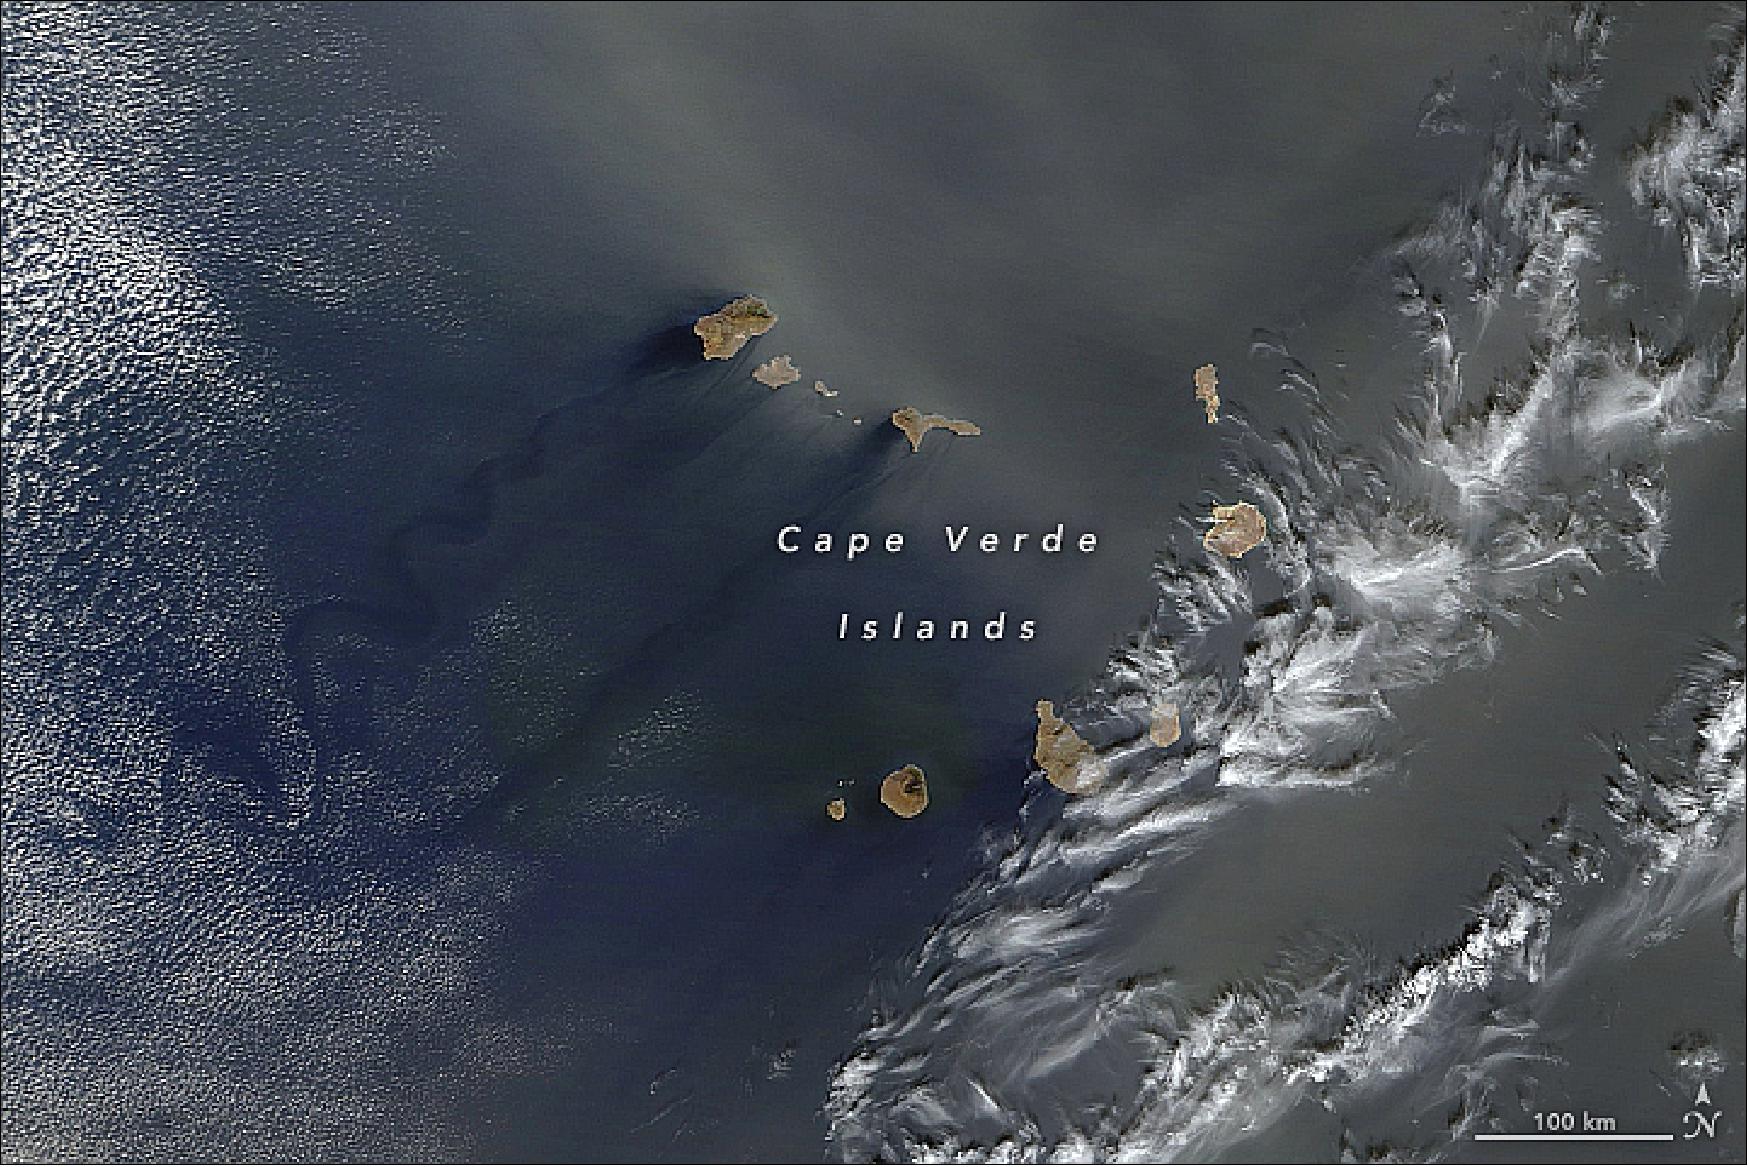 Figure 36: MODIS image of Saharan dust, acquired on 22 Jan. 2018, bathing the Cape Verde islands - resulting in wakes and vortices on the leeward side of the islands (image credit: NASA Earth Observatory, images by Joshua Stevens and Jeff Schmaltz, using MODIS data from LANCE/EOSDIS Rapid Response. Story by Mike Carlowicz and Holli Riebeek)